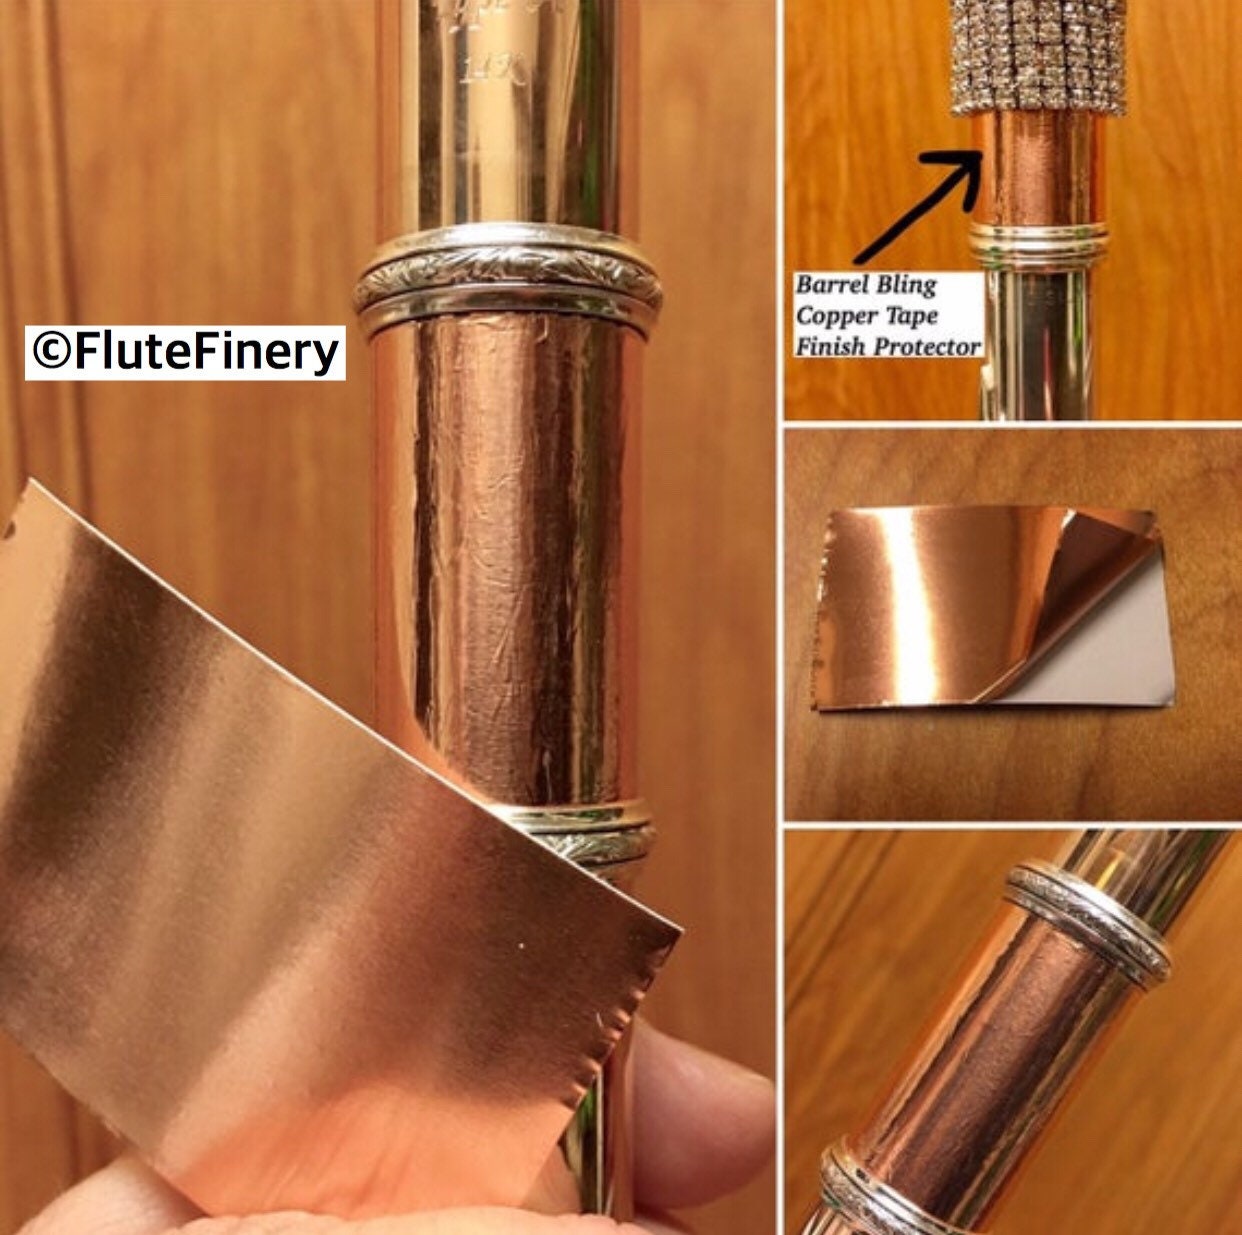 Copper Tape Flute Barrel Bling Finish Protector for Use With Flute Barrel  Bling. Includes 4 Pieces. Please Read Full Description Below. 